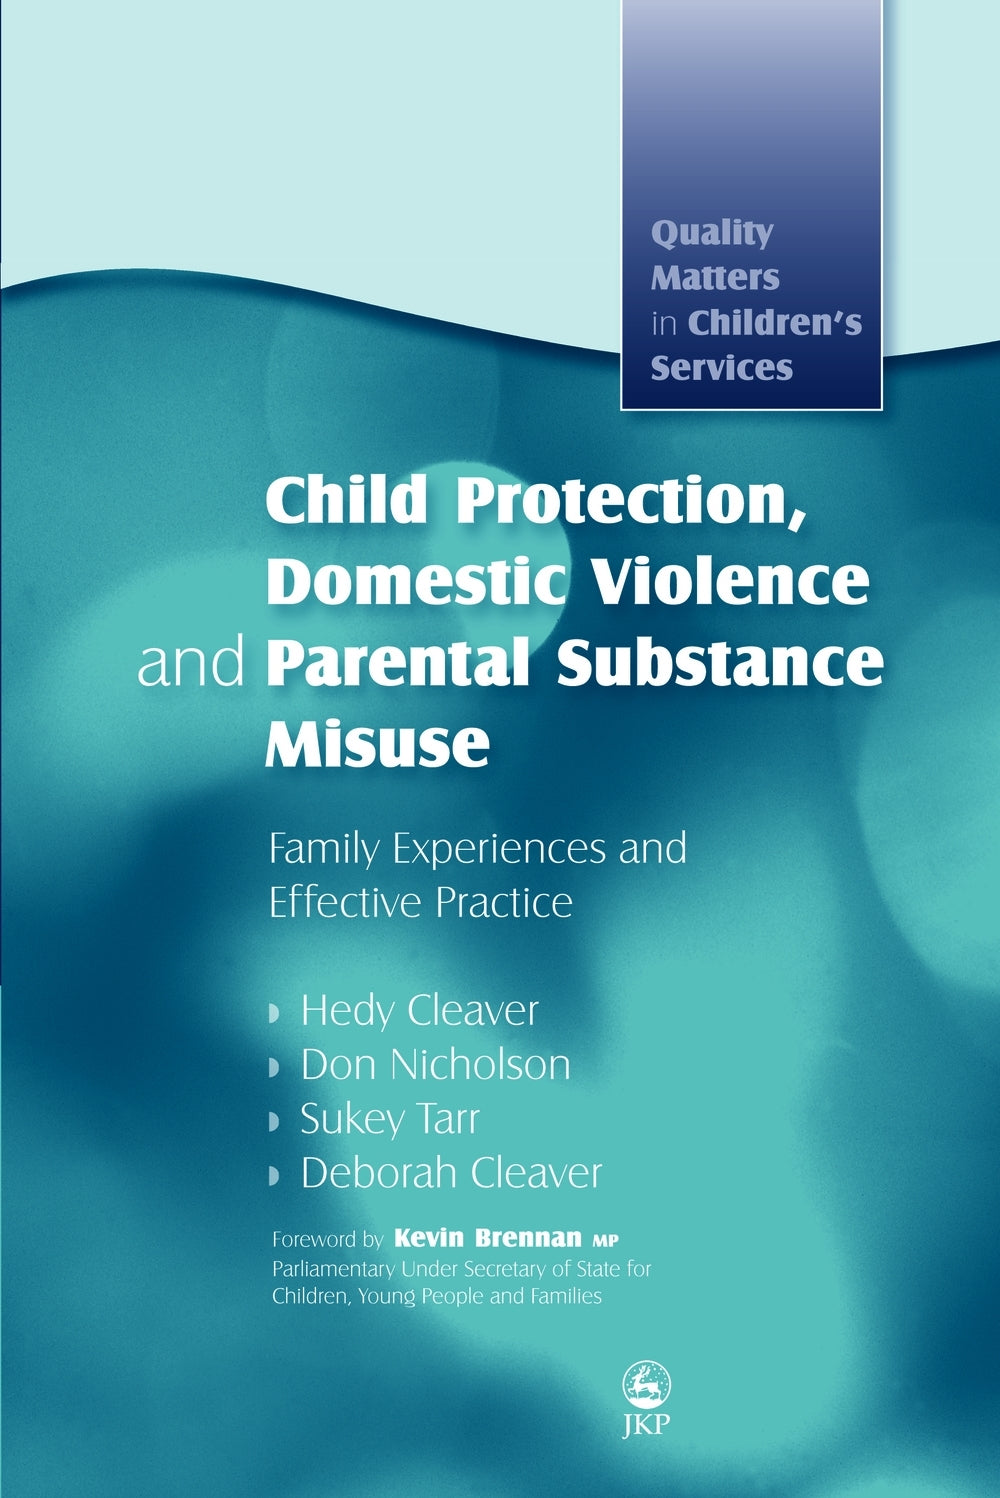 Child Protection, Domestic Violence and Parental Substance Misuse by Sukey Tarr, Deborah Cleaver, Hedy Cleaver, Don Nicholson